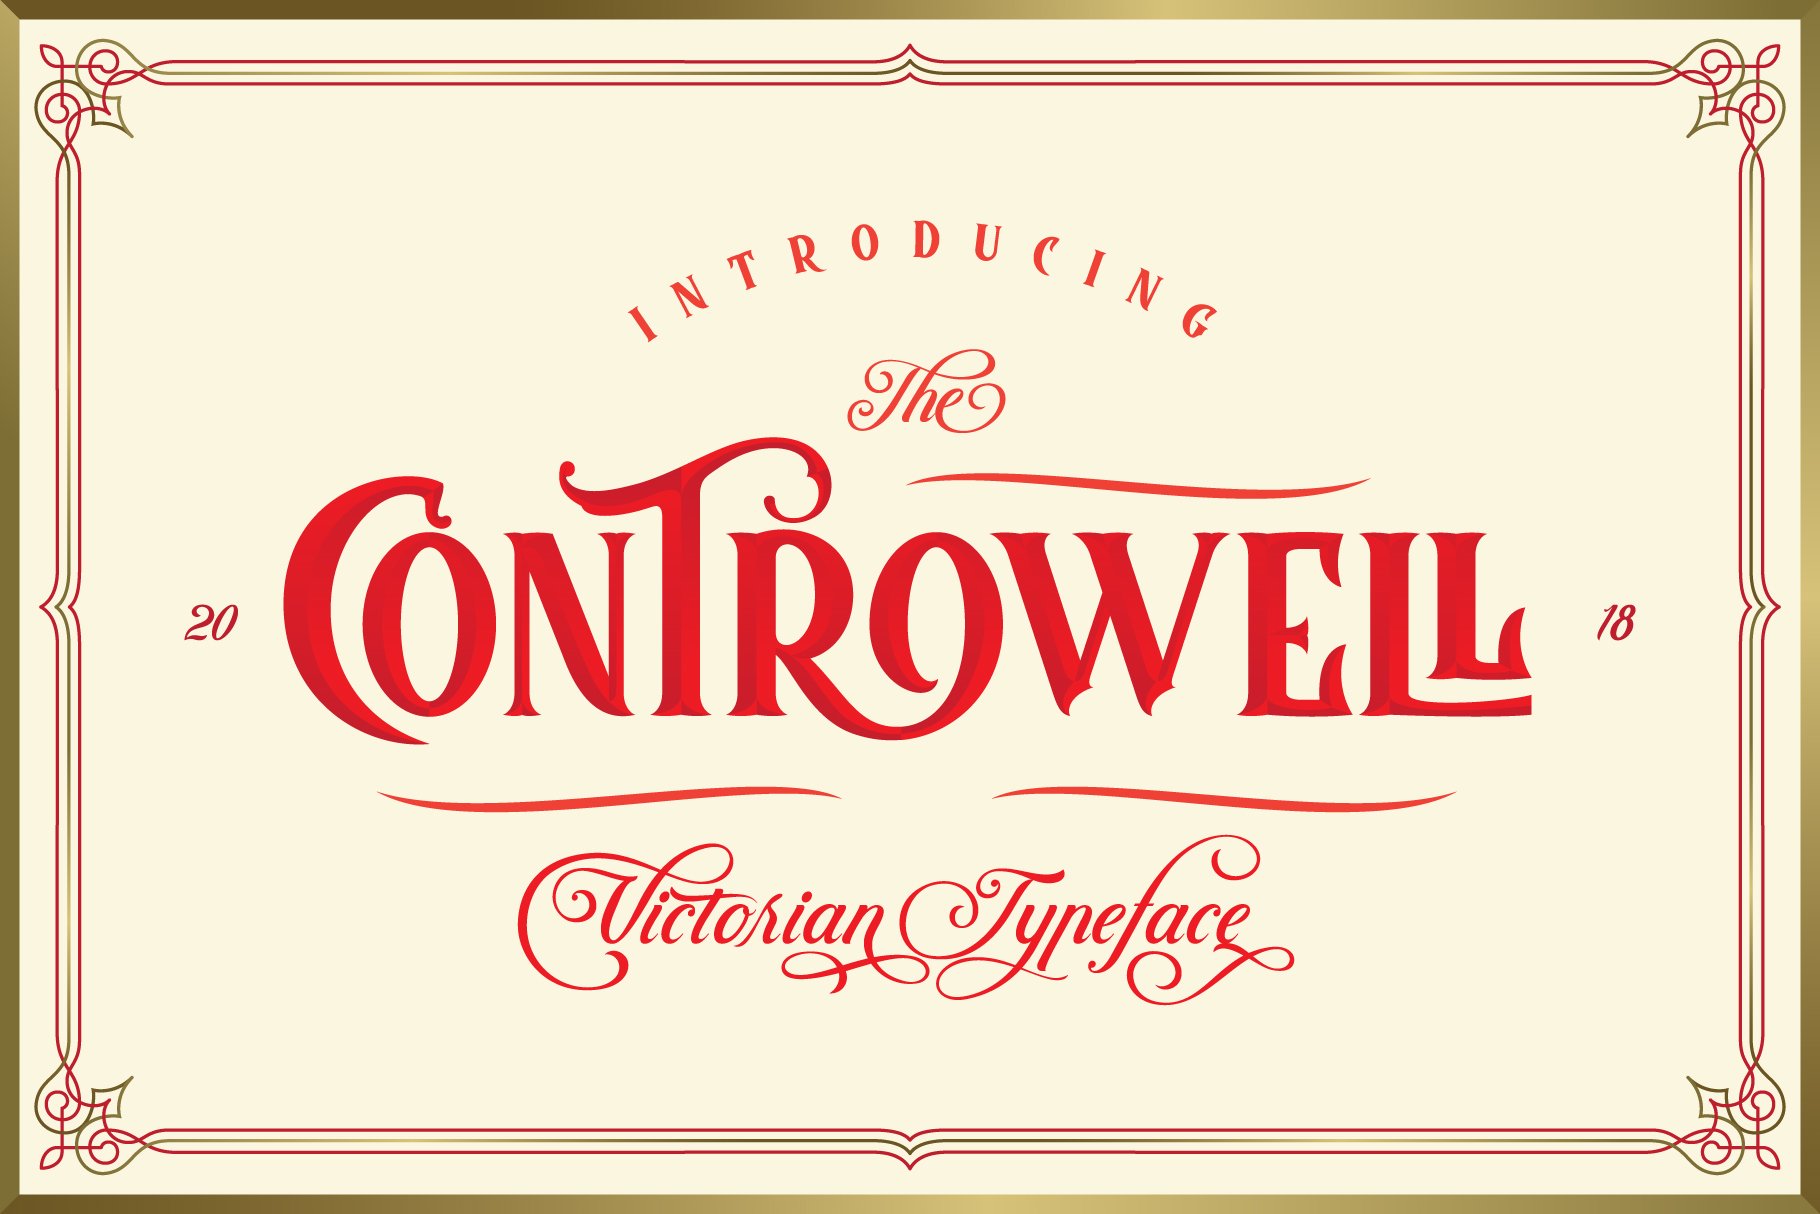 Controwell Victorian Typeface 30%! cover image.